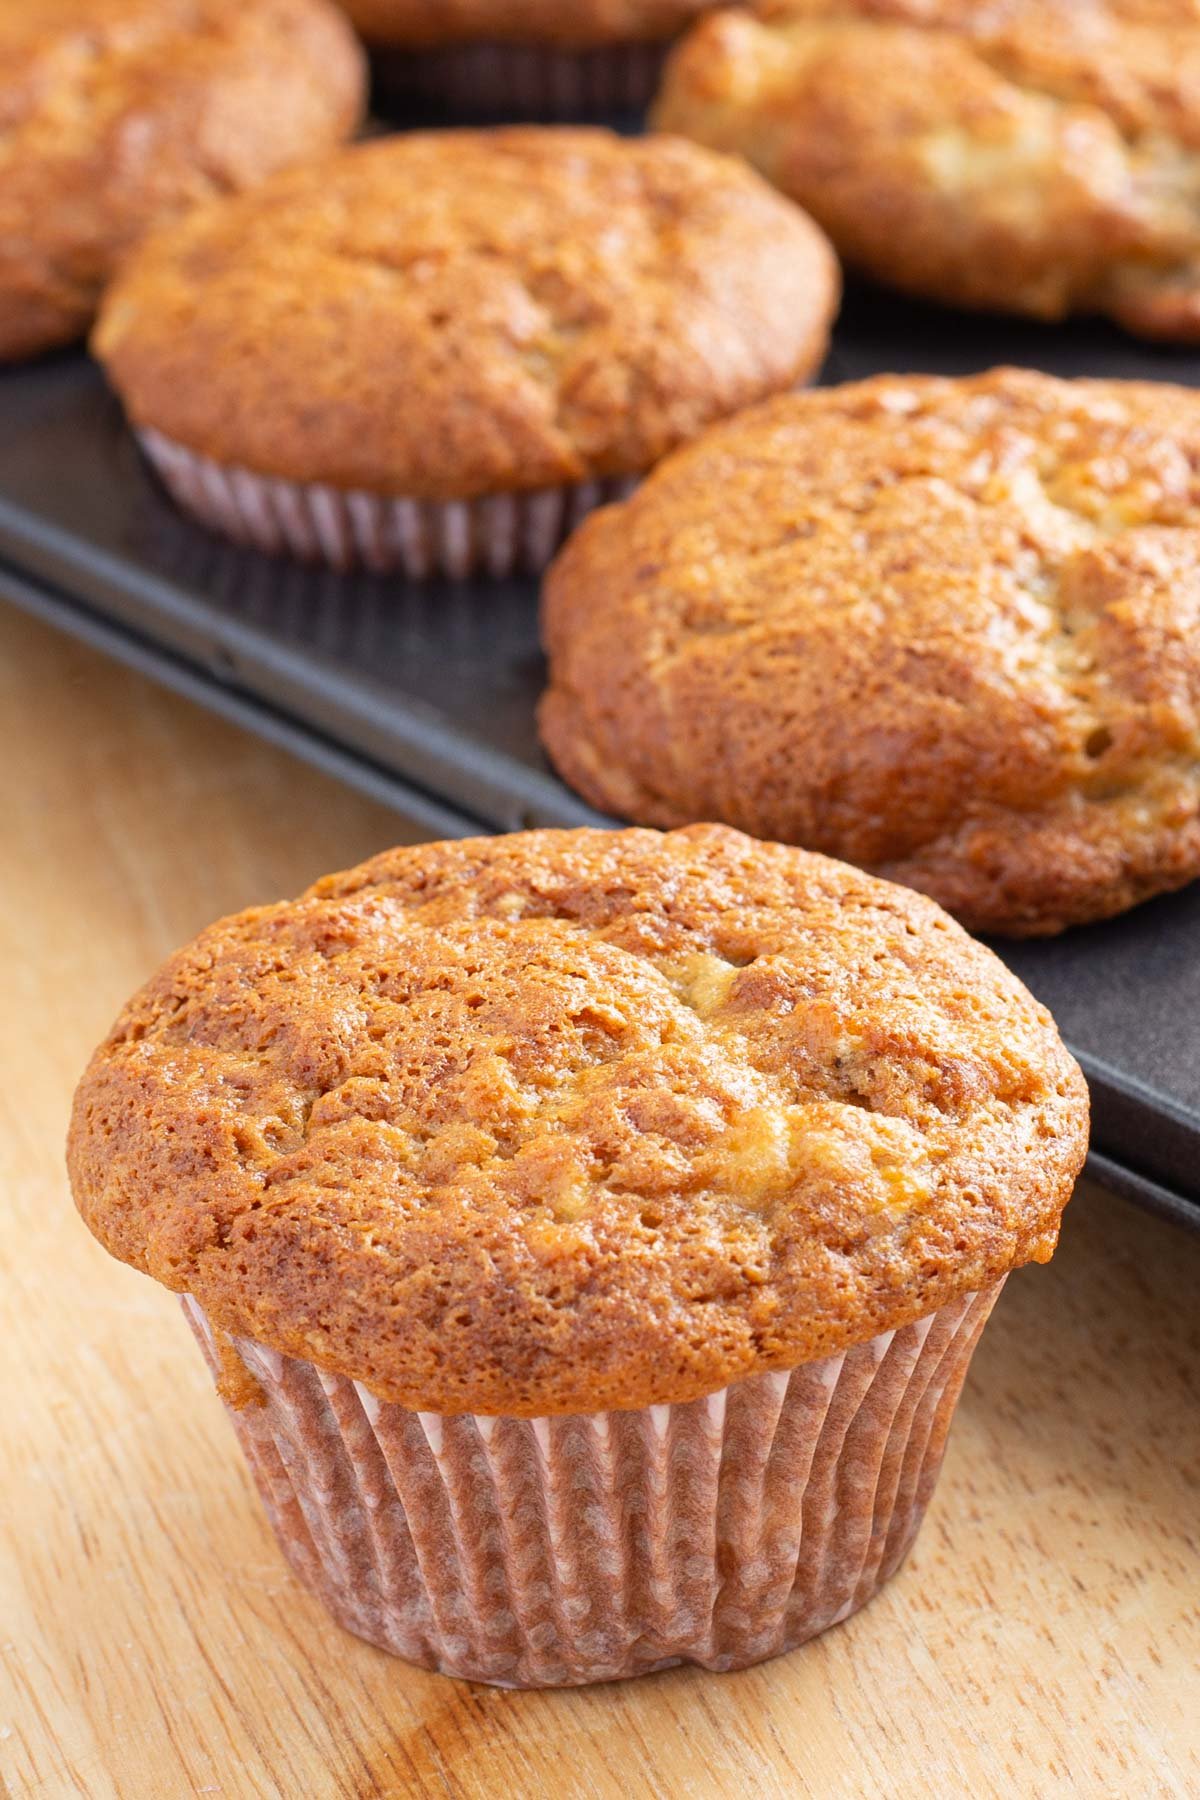 Banana muffin with pan of muffins in background.